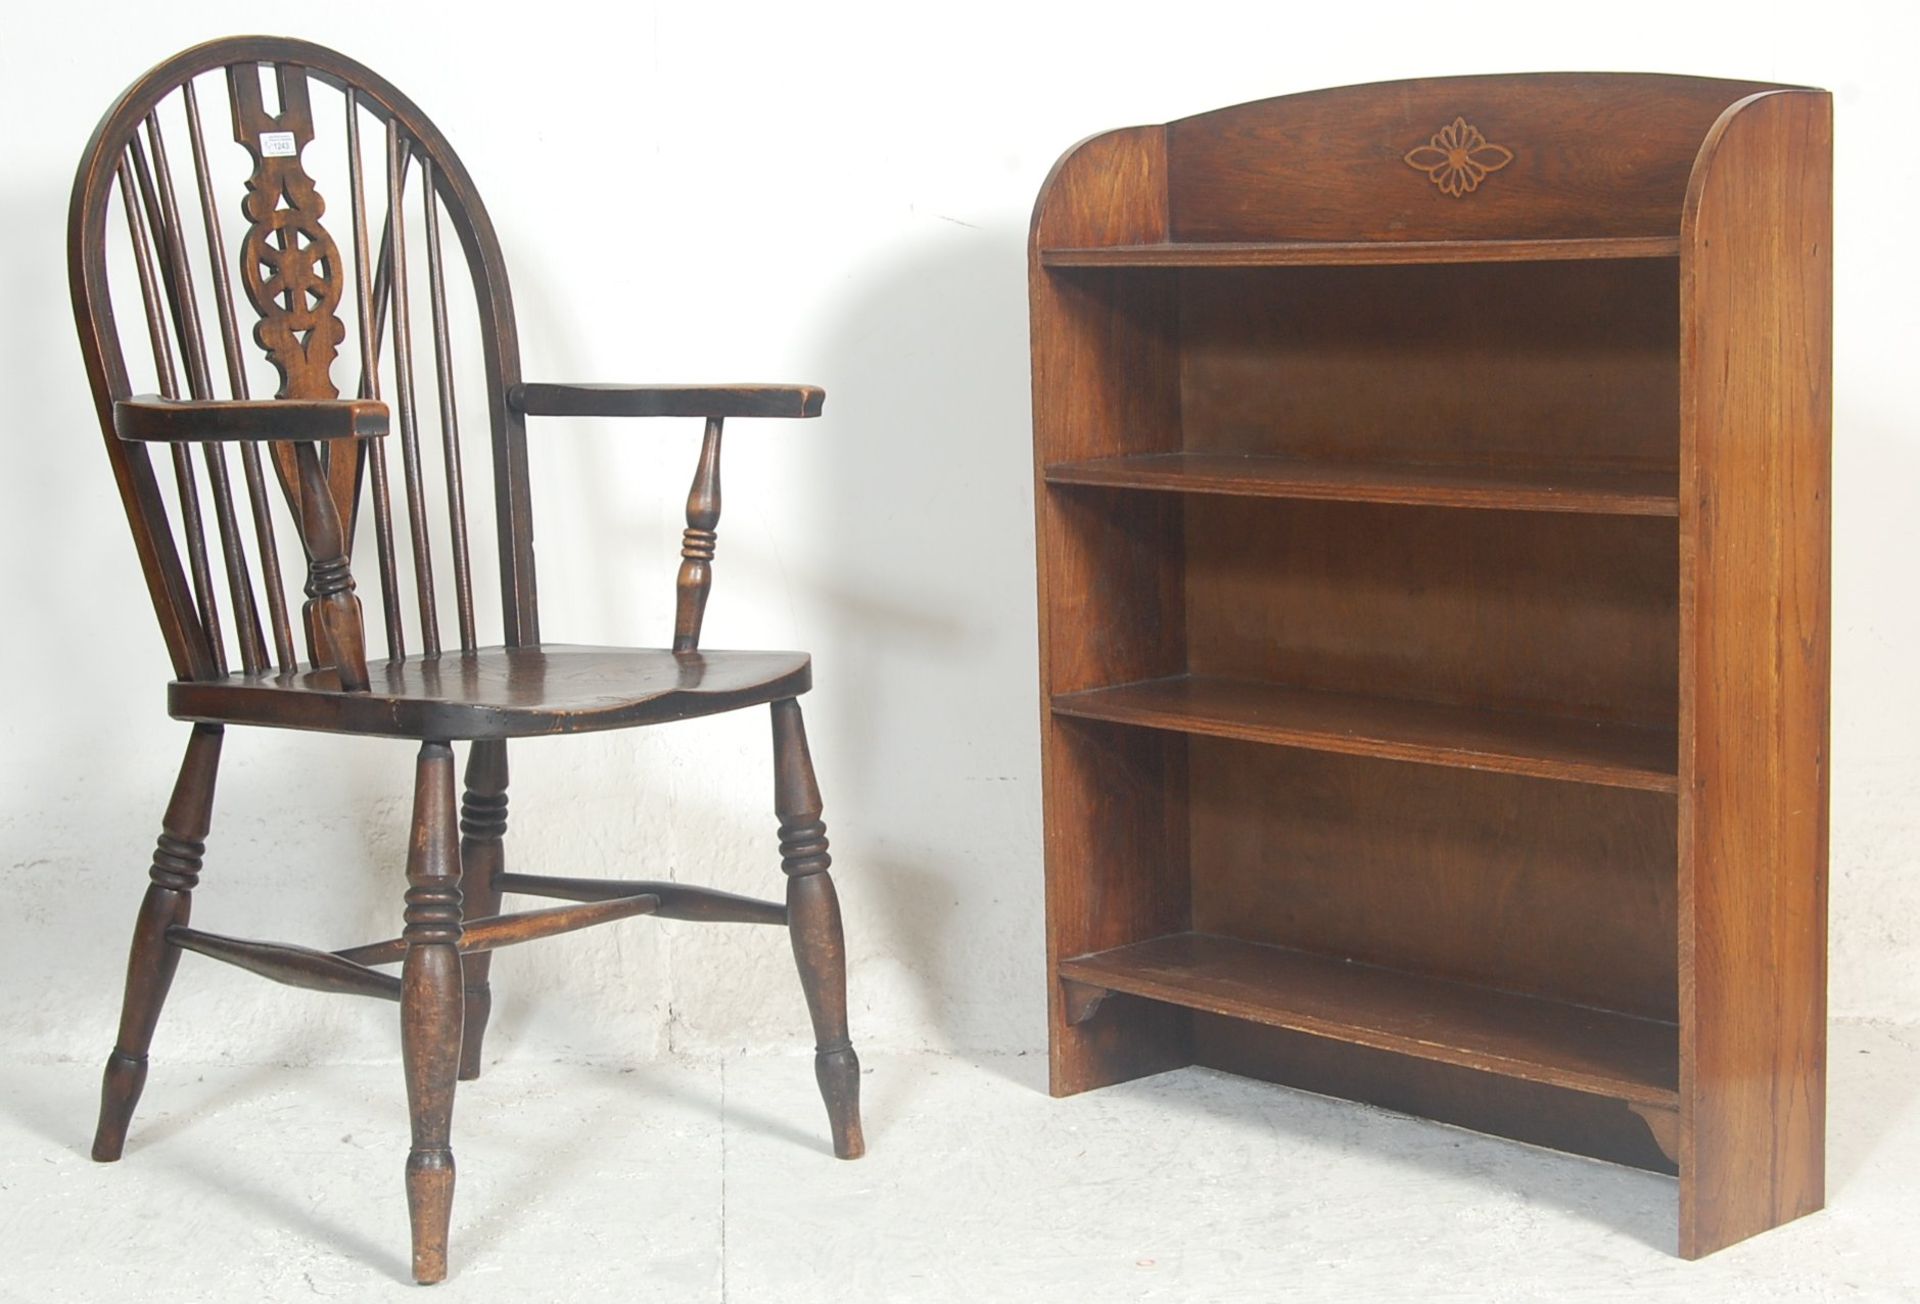 A Victorian 19th century beech and elm wood Wheel back Windsor armchair. The chair being raised on